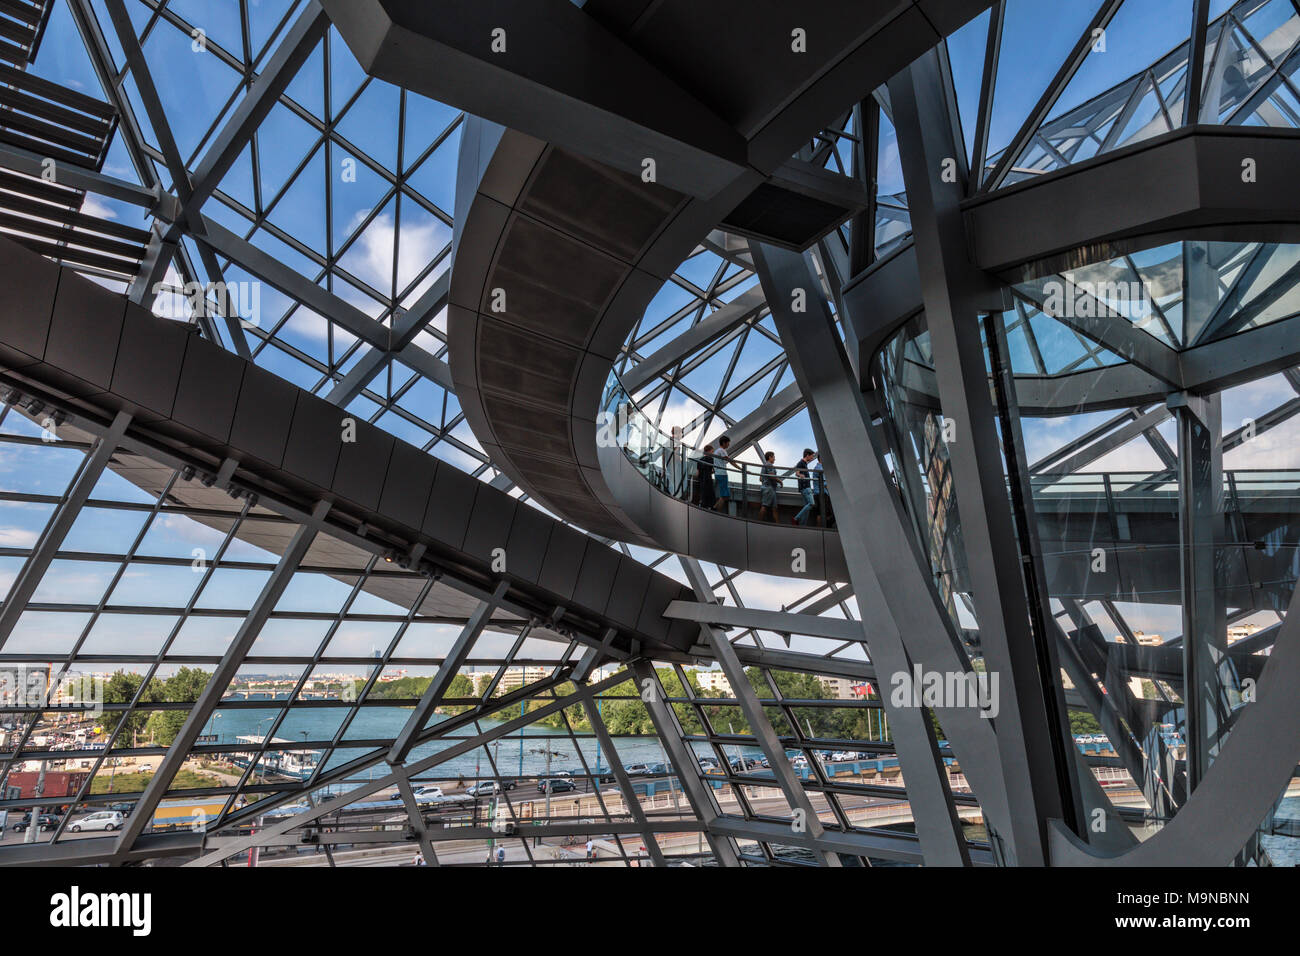 Interior view of Musée des Confluences, a science centre and anthropology museum, Lyon, France Stock Photo